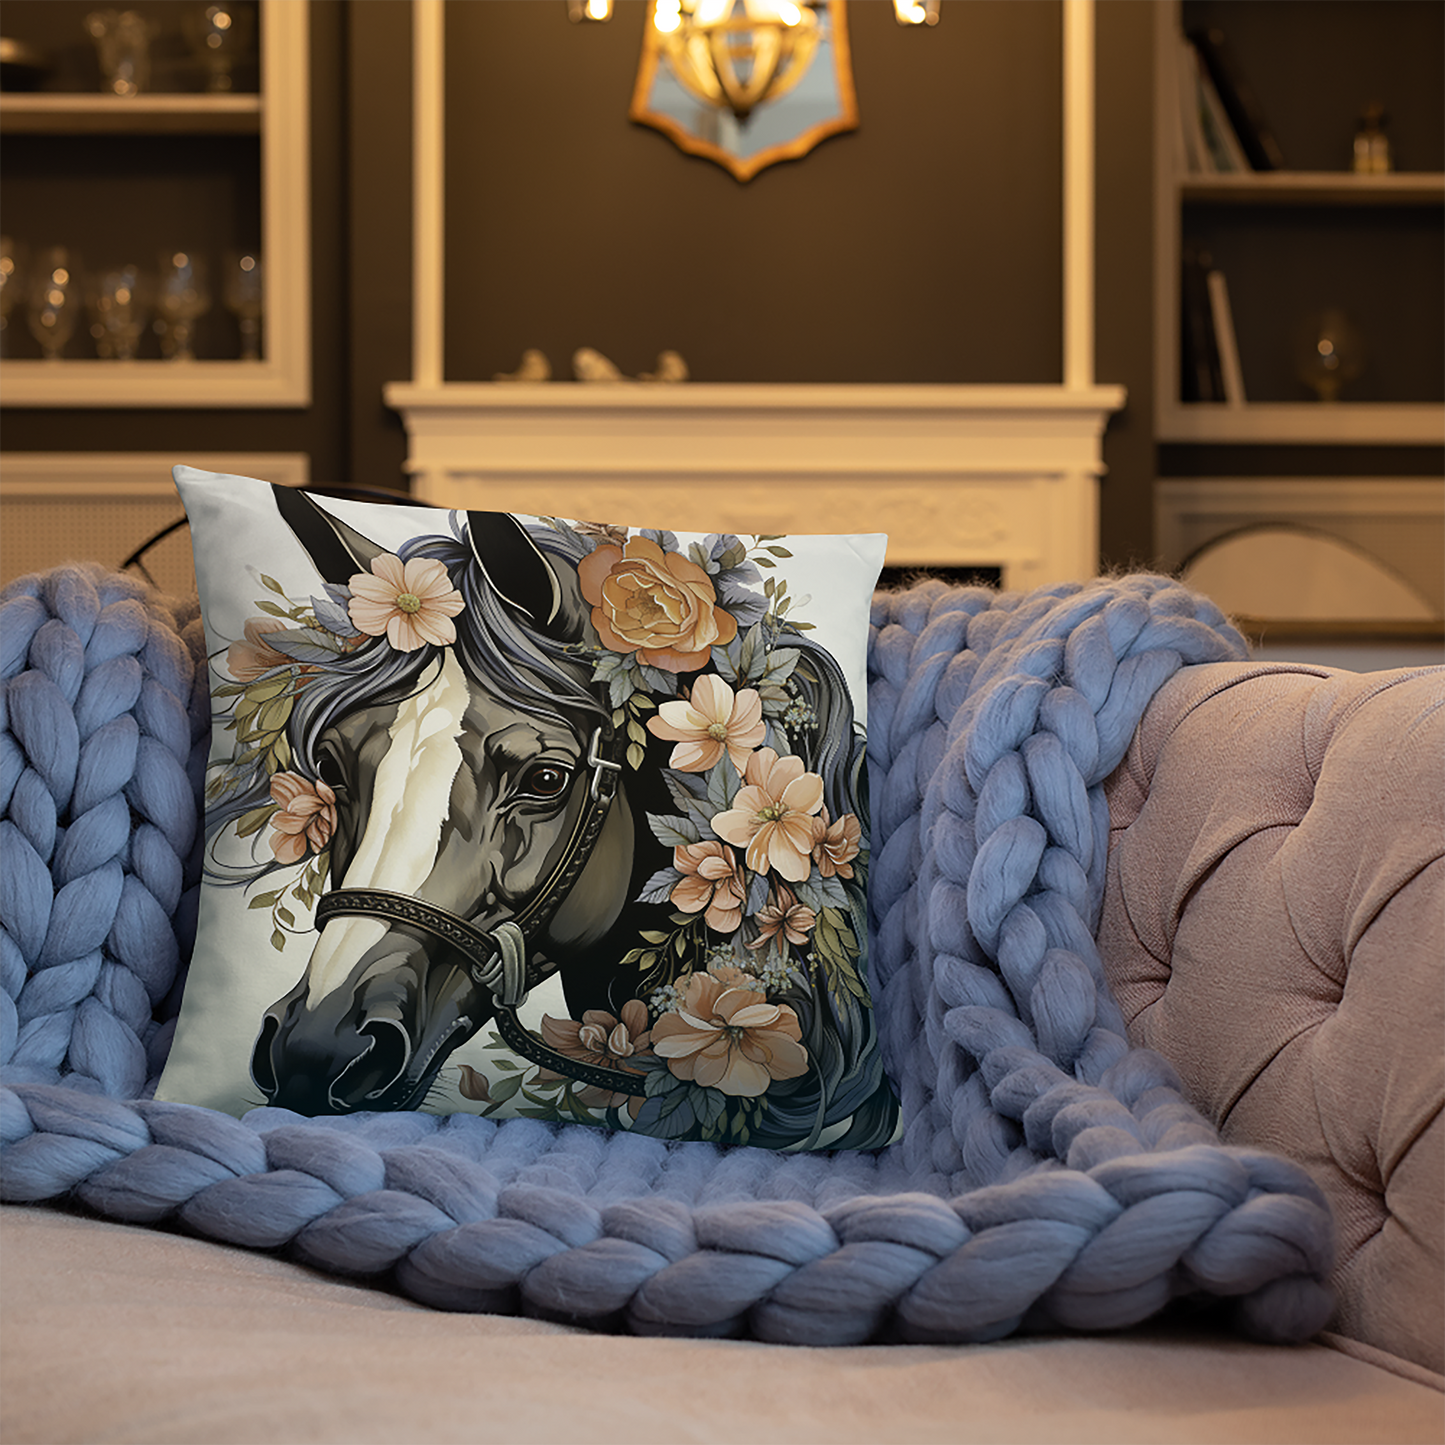 Horse Throw Pillow White Elegance Floral Comfort Polyester Decorative Cushion 18x18